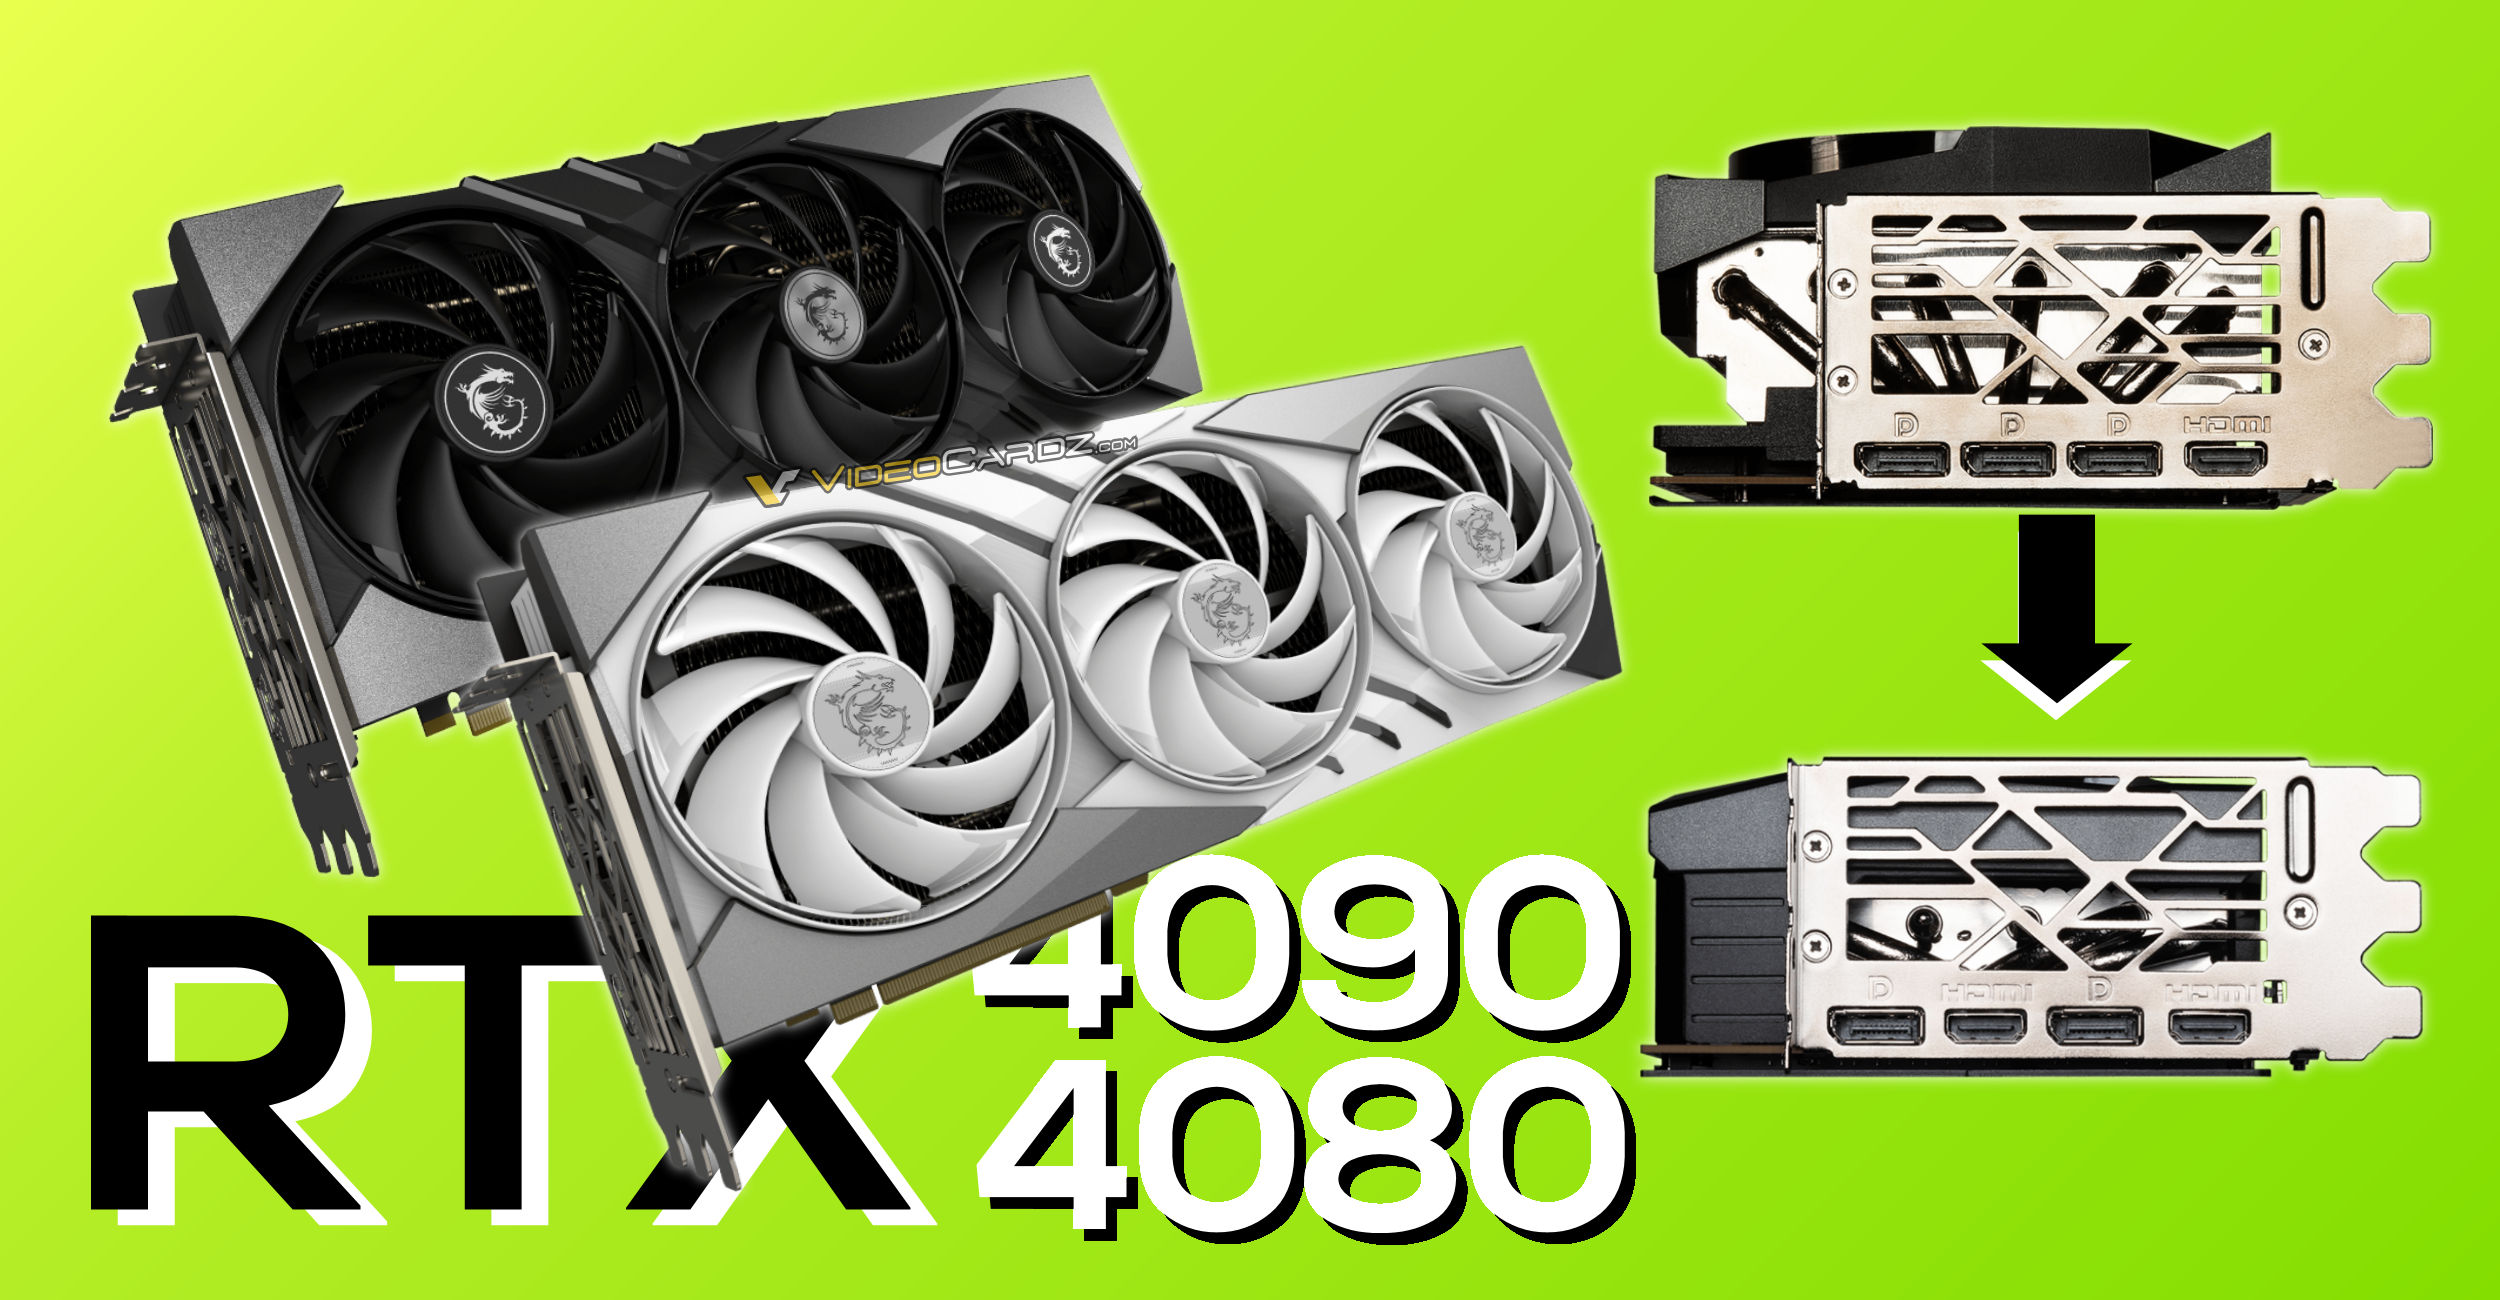 GALAX Unveil its GeForce RTX 4090/4080 Series of Graphics Cards